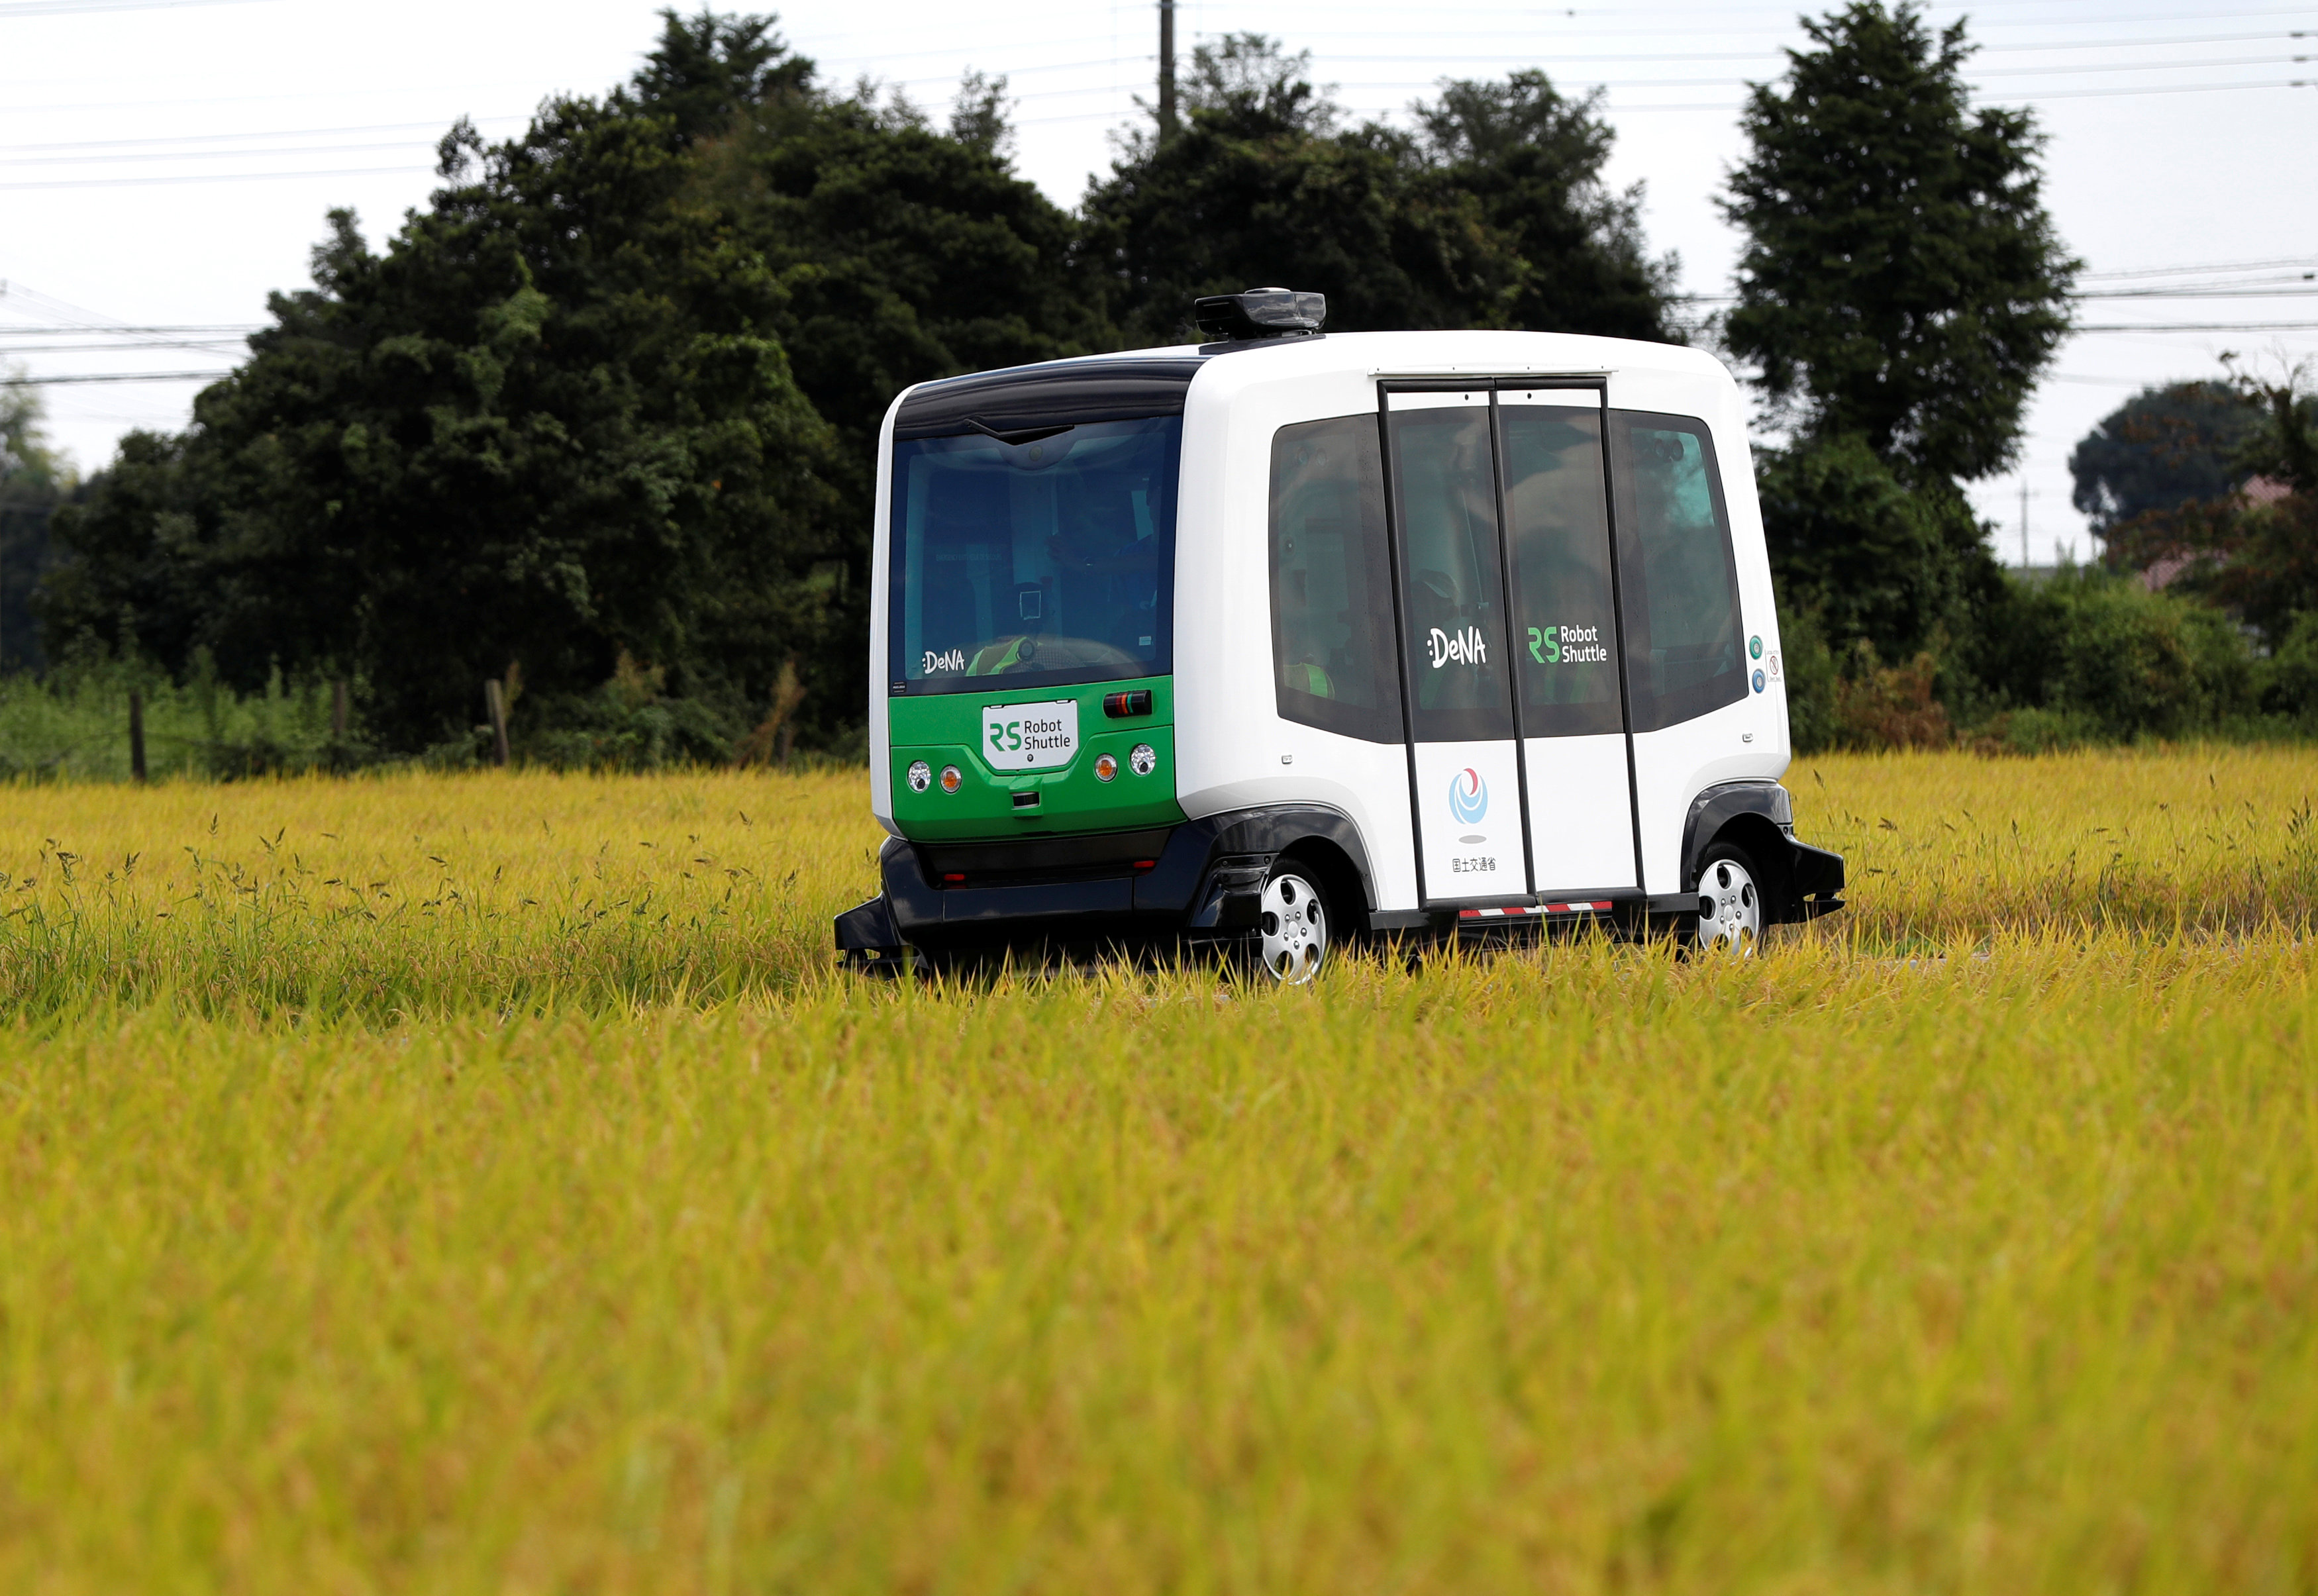 In pictures: Japan starts trials of driverless shuttle bus